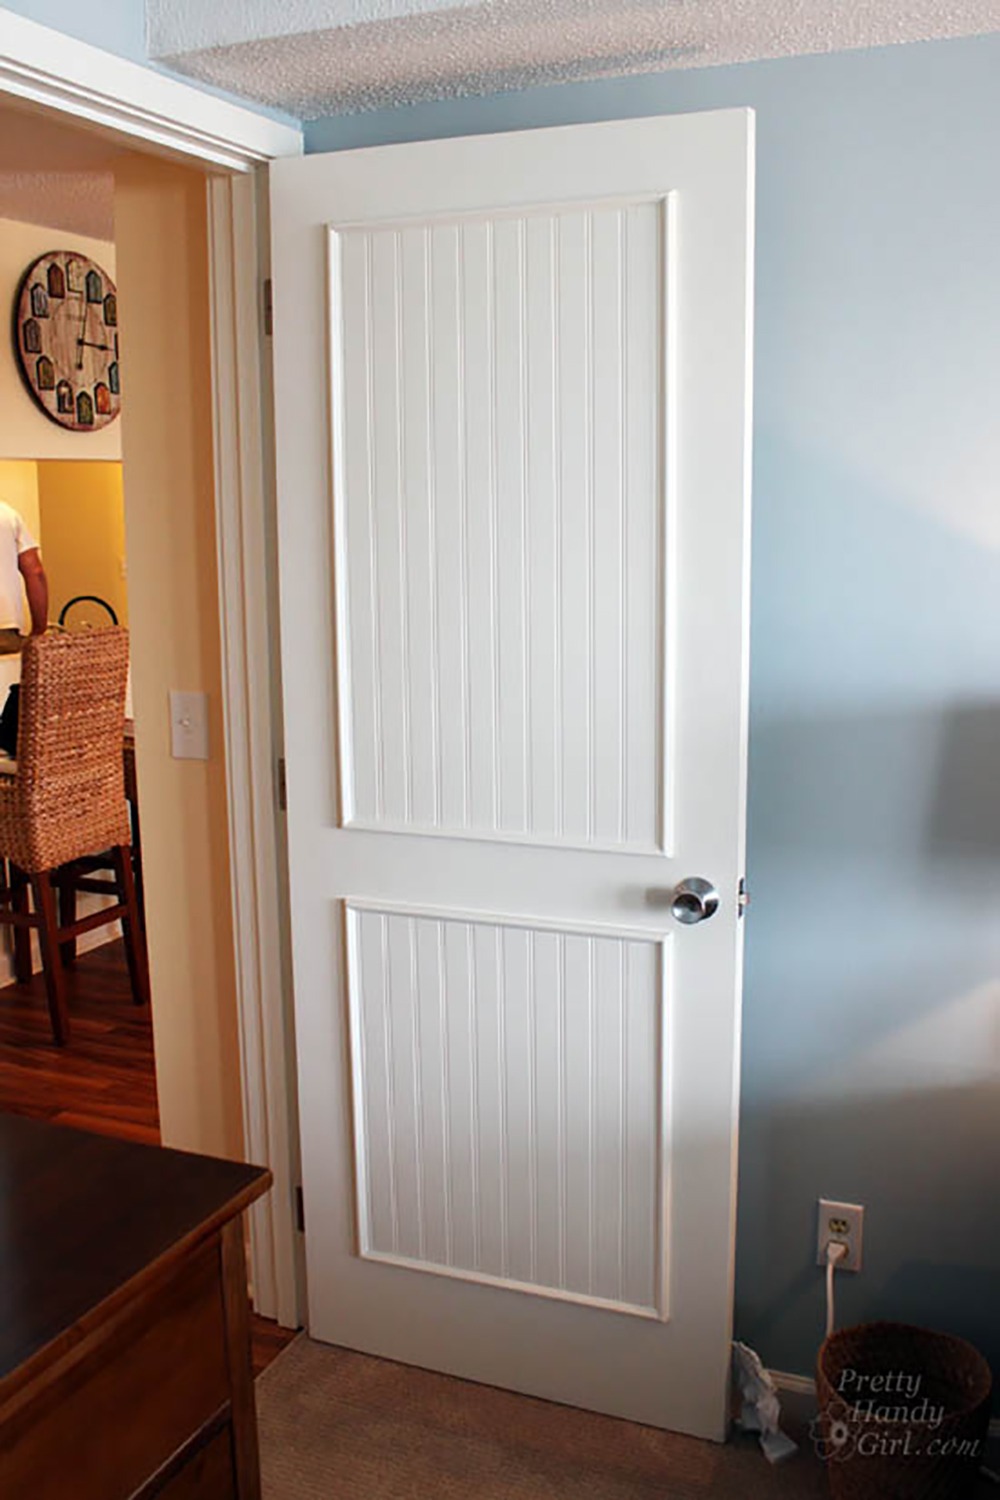 How to Add Decorative Molding to Flat Doors - Mobile Home Repair